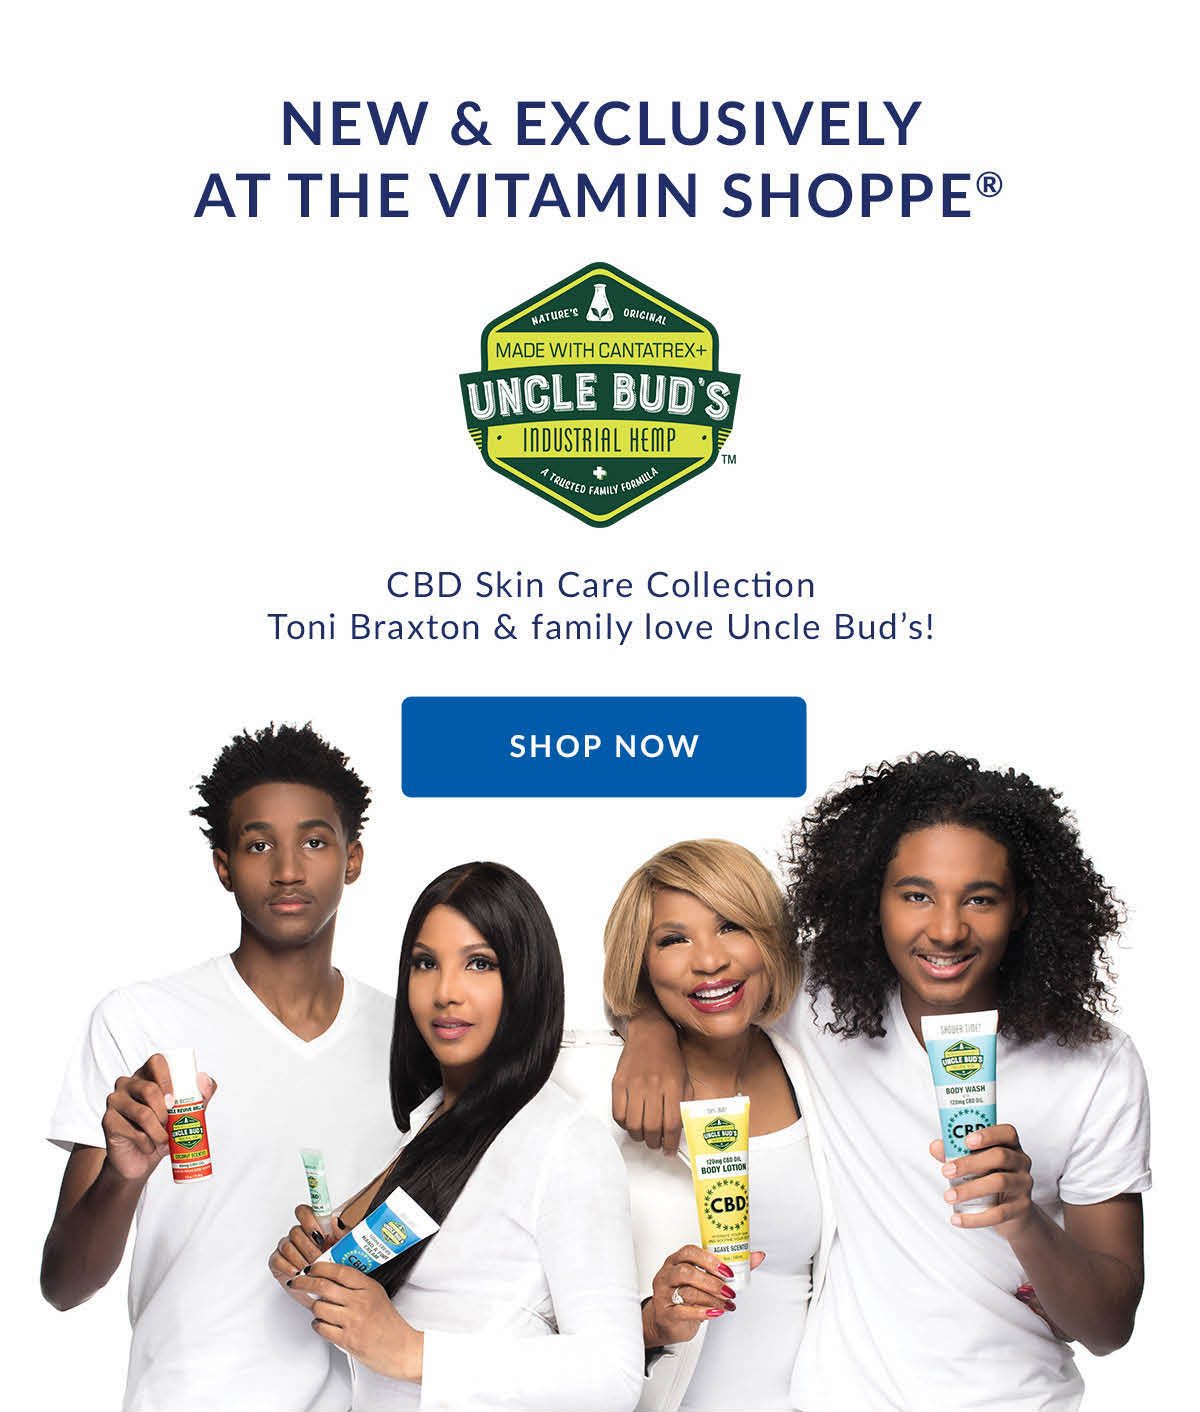 NEW & EXCLUSIVELY AT THE VITAMIN SHOPPE | CBD Skin Care Collection Toni Braxton & family love Uncle Bud's! | SHOP NOW